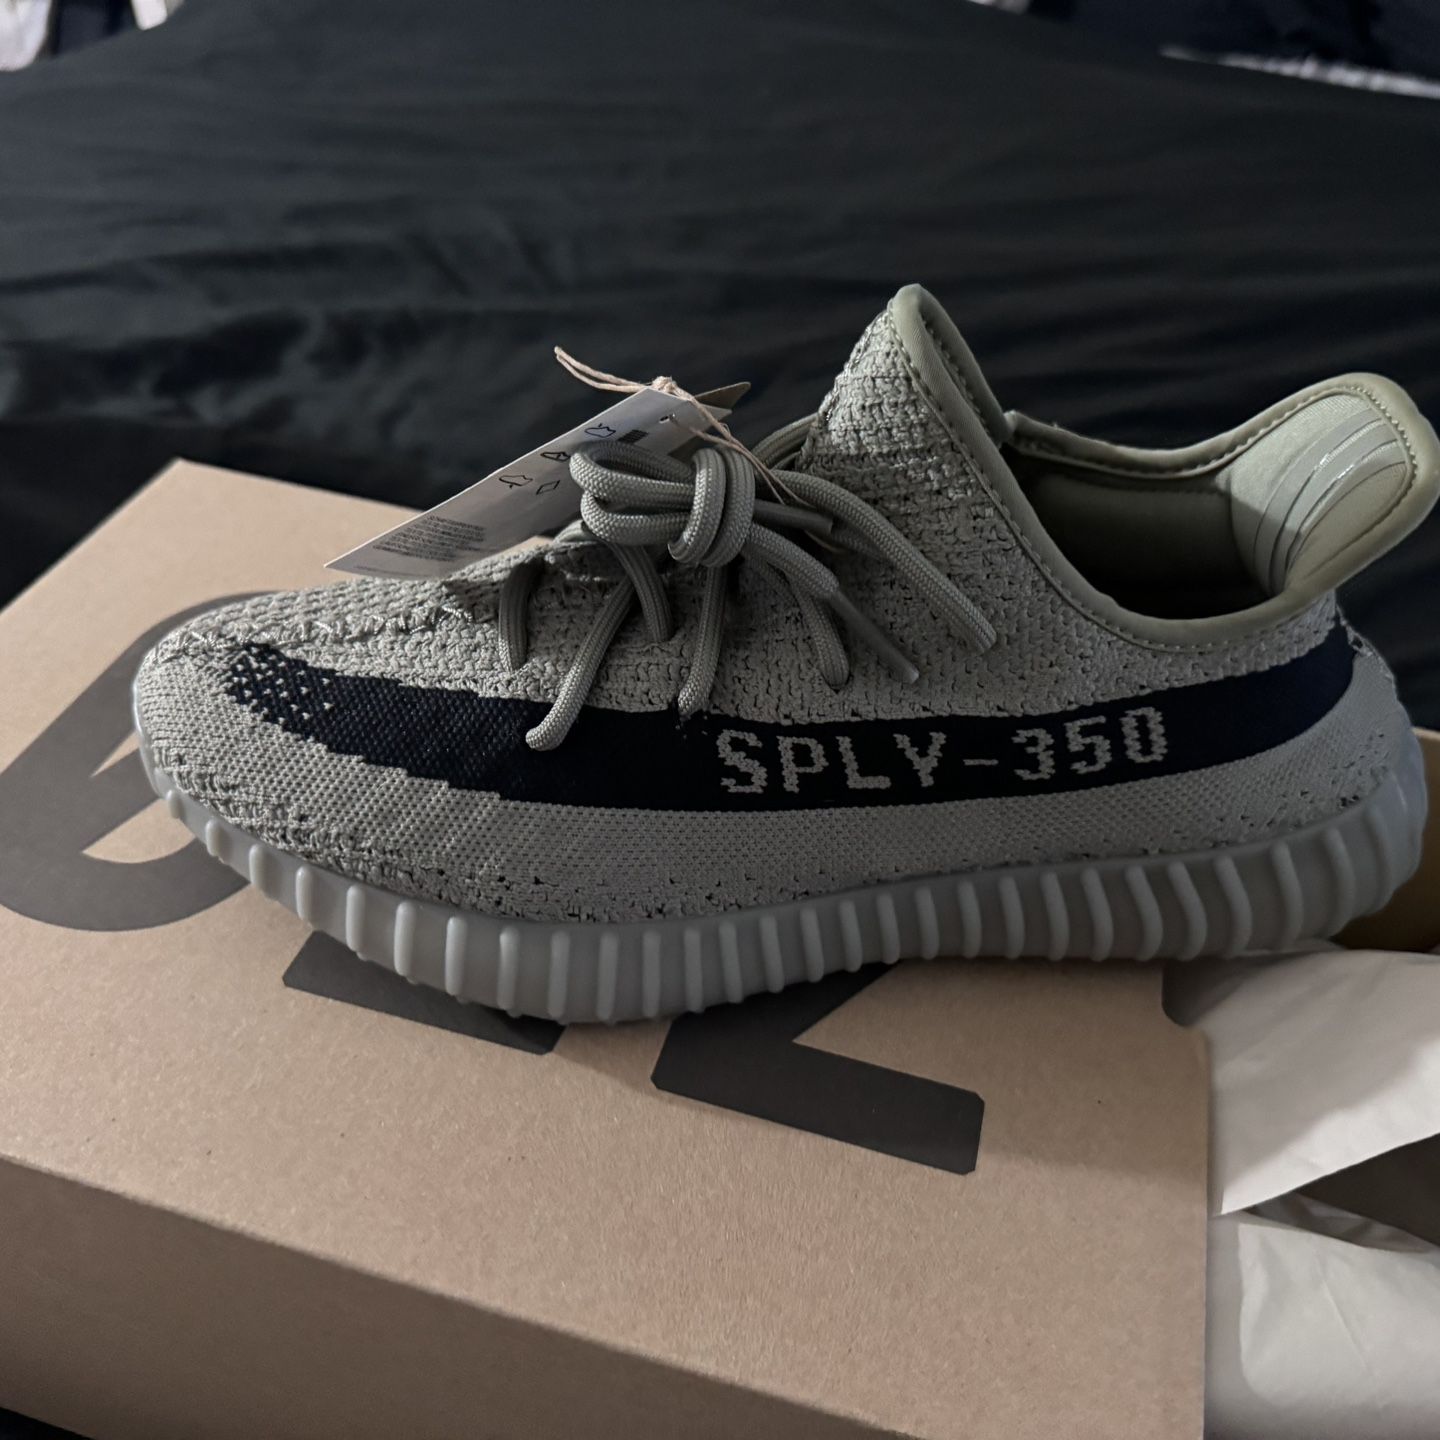 Yeezy Shoes And Sandals Please Read All Info Is In Description 